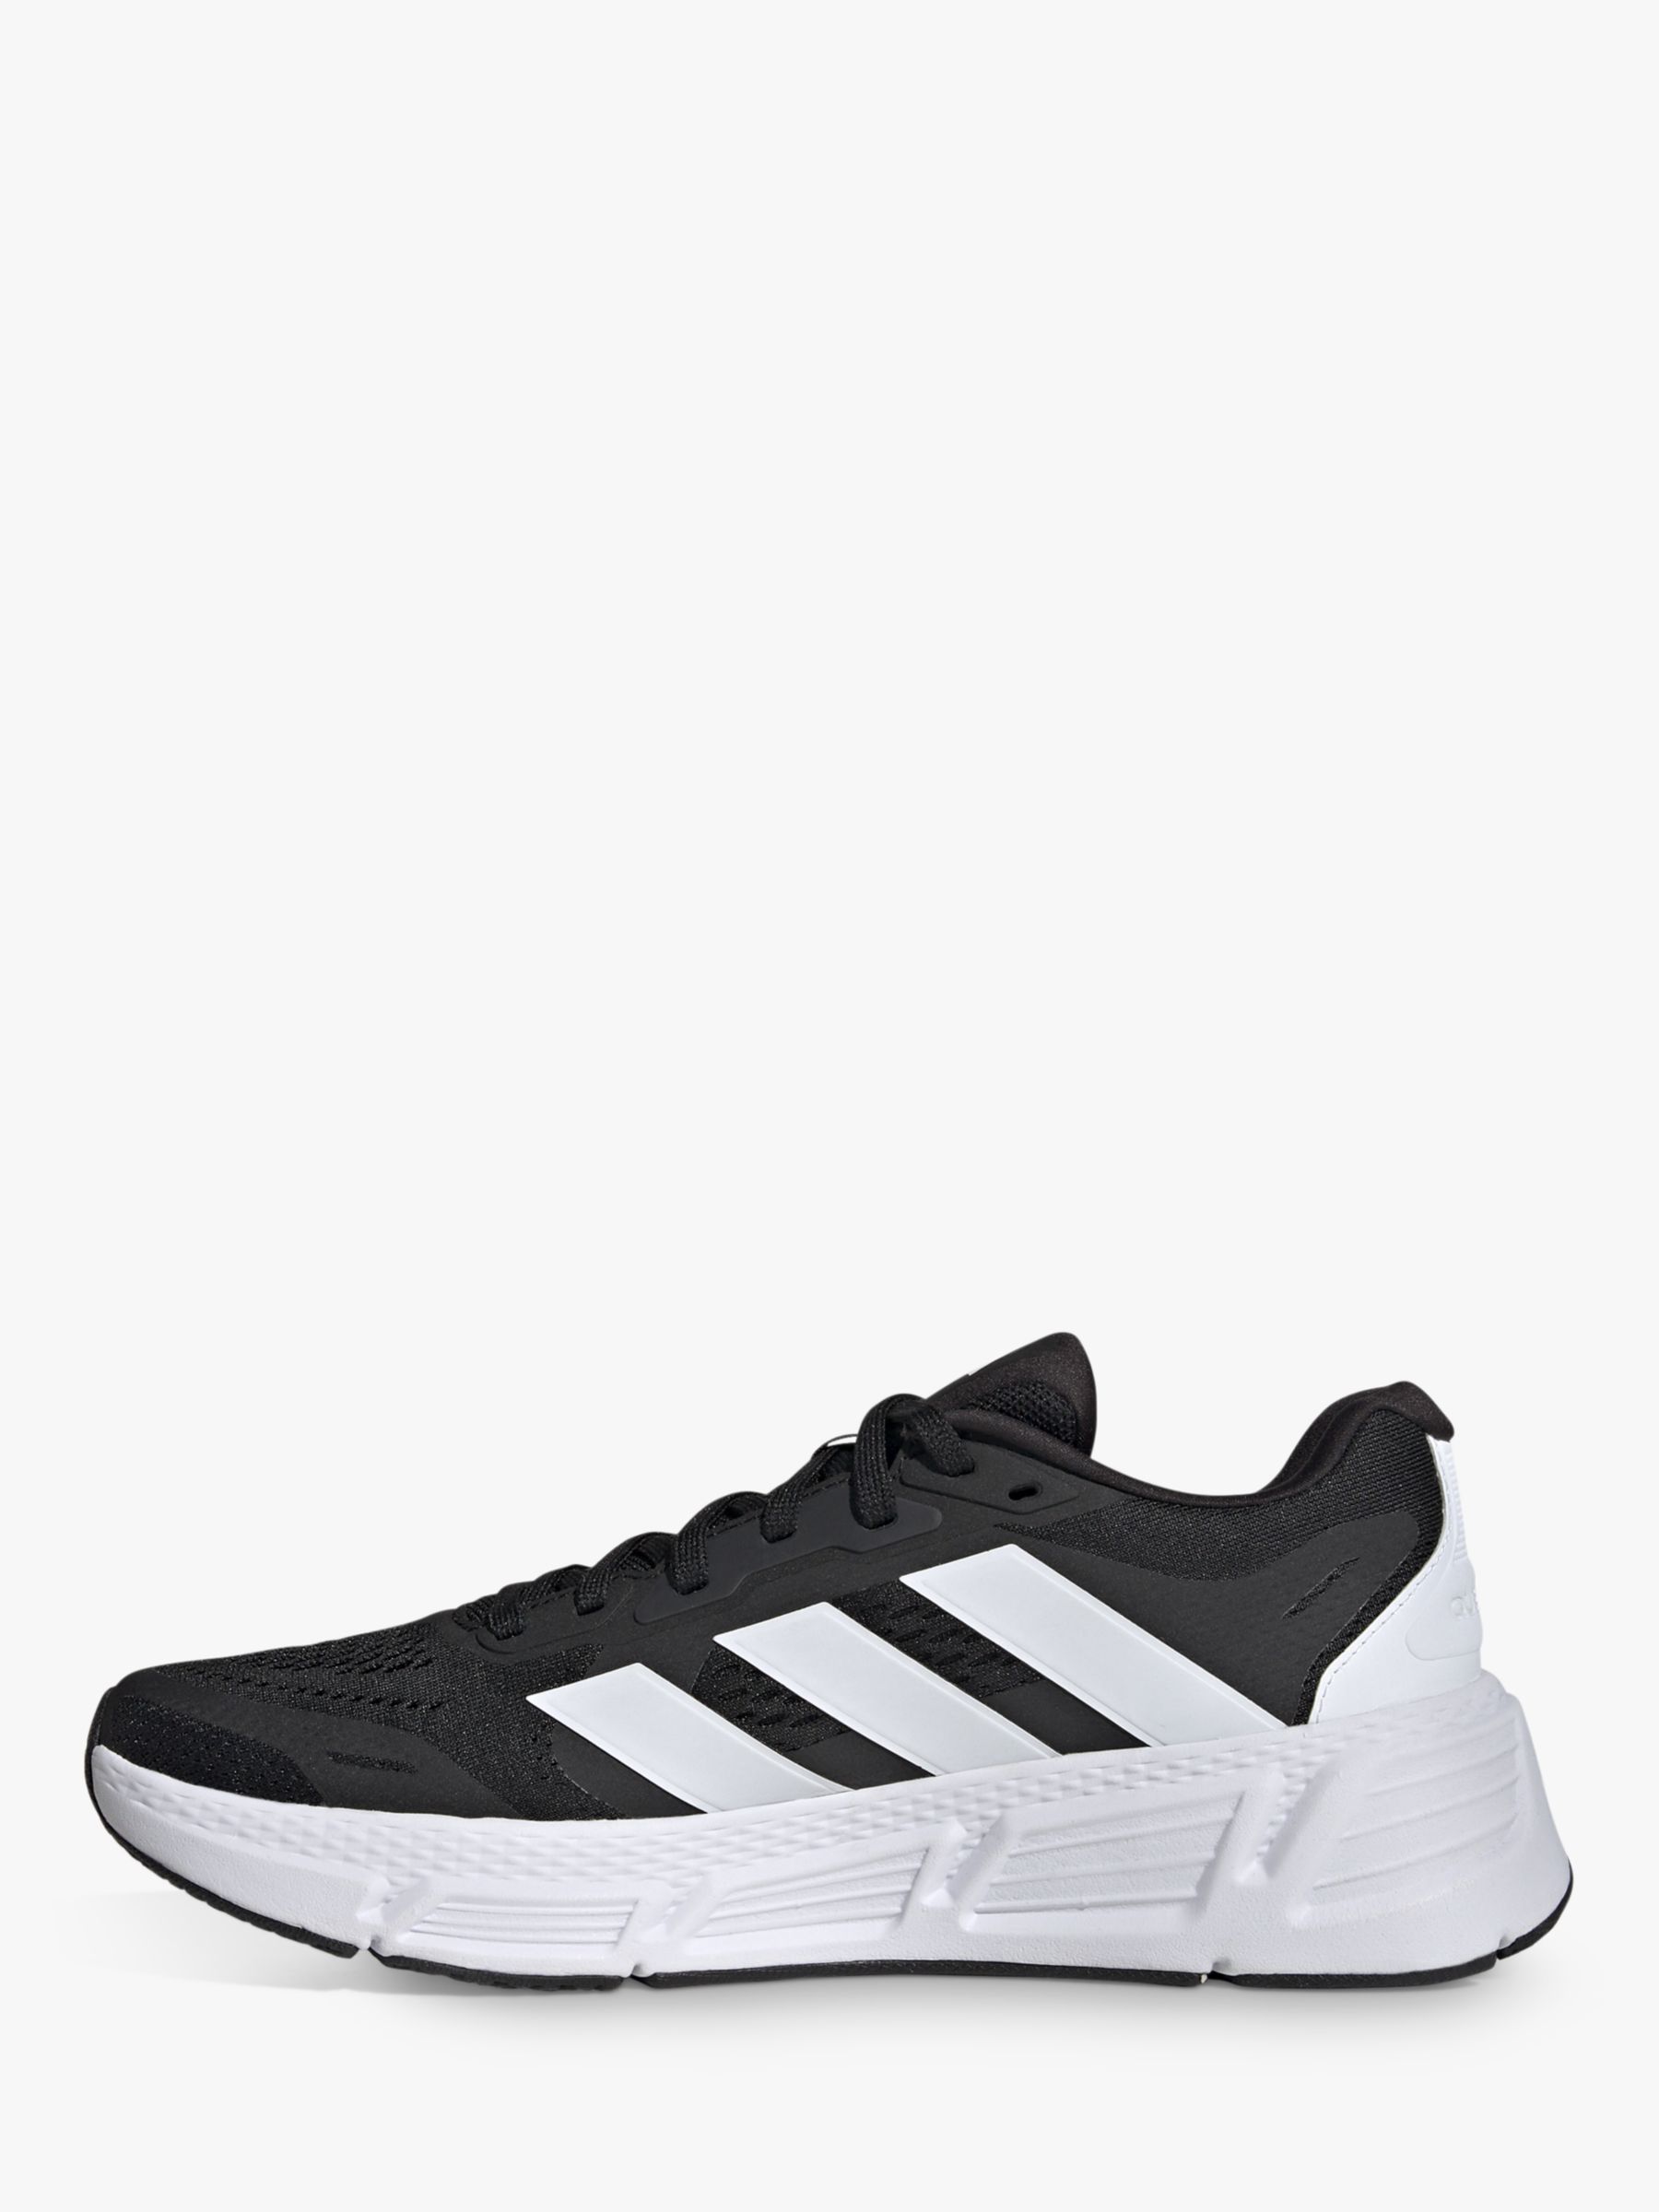 Buy adidas Questar 2 Bounce Men's Running Shoes Online at johnlewis.com